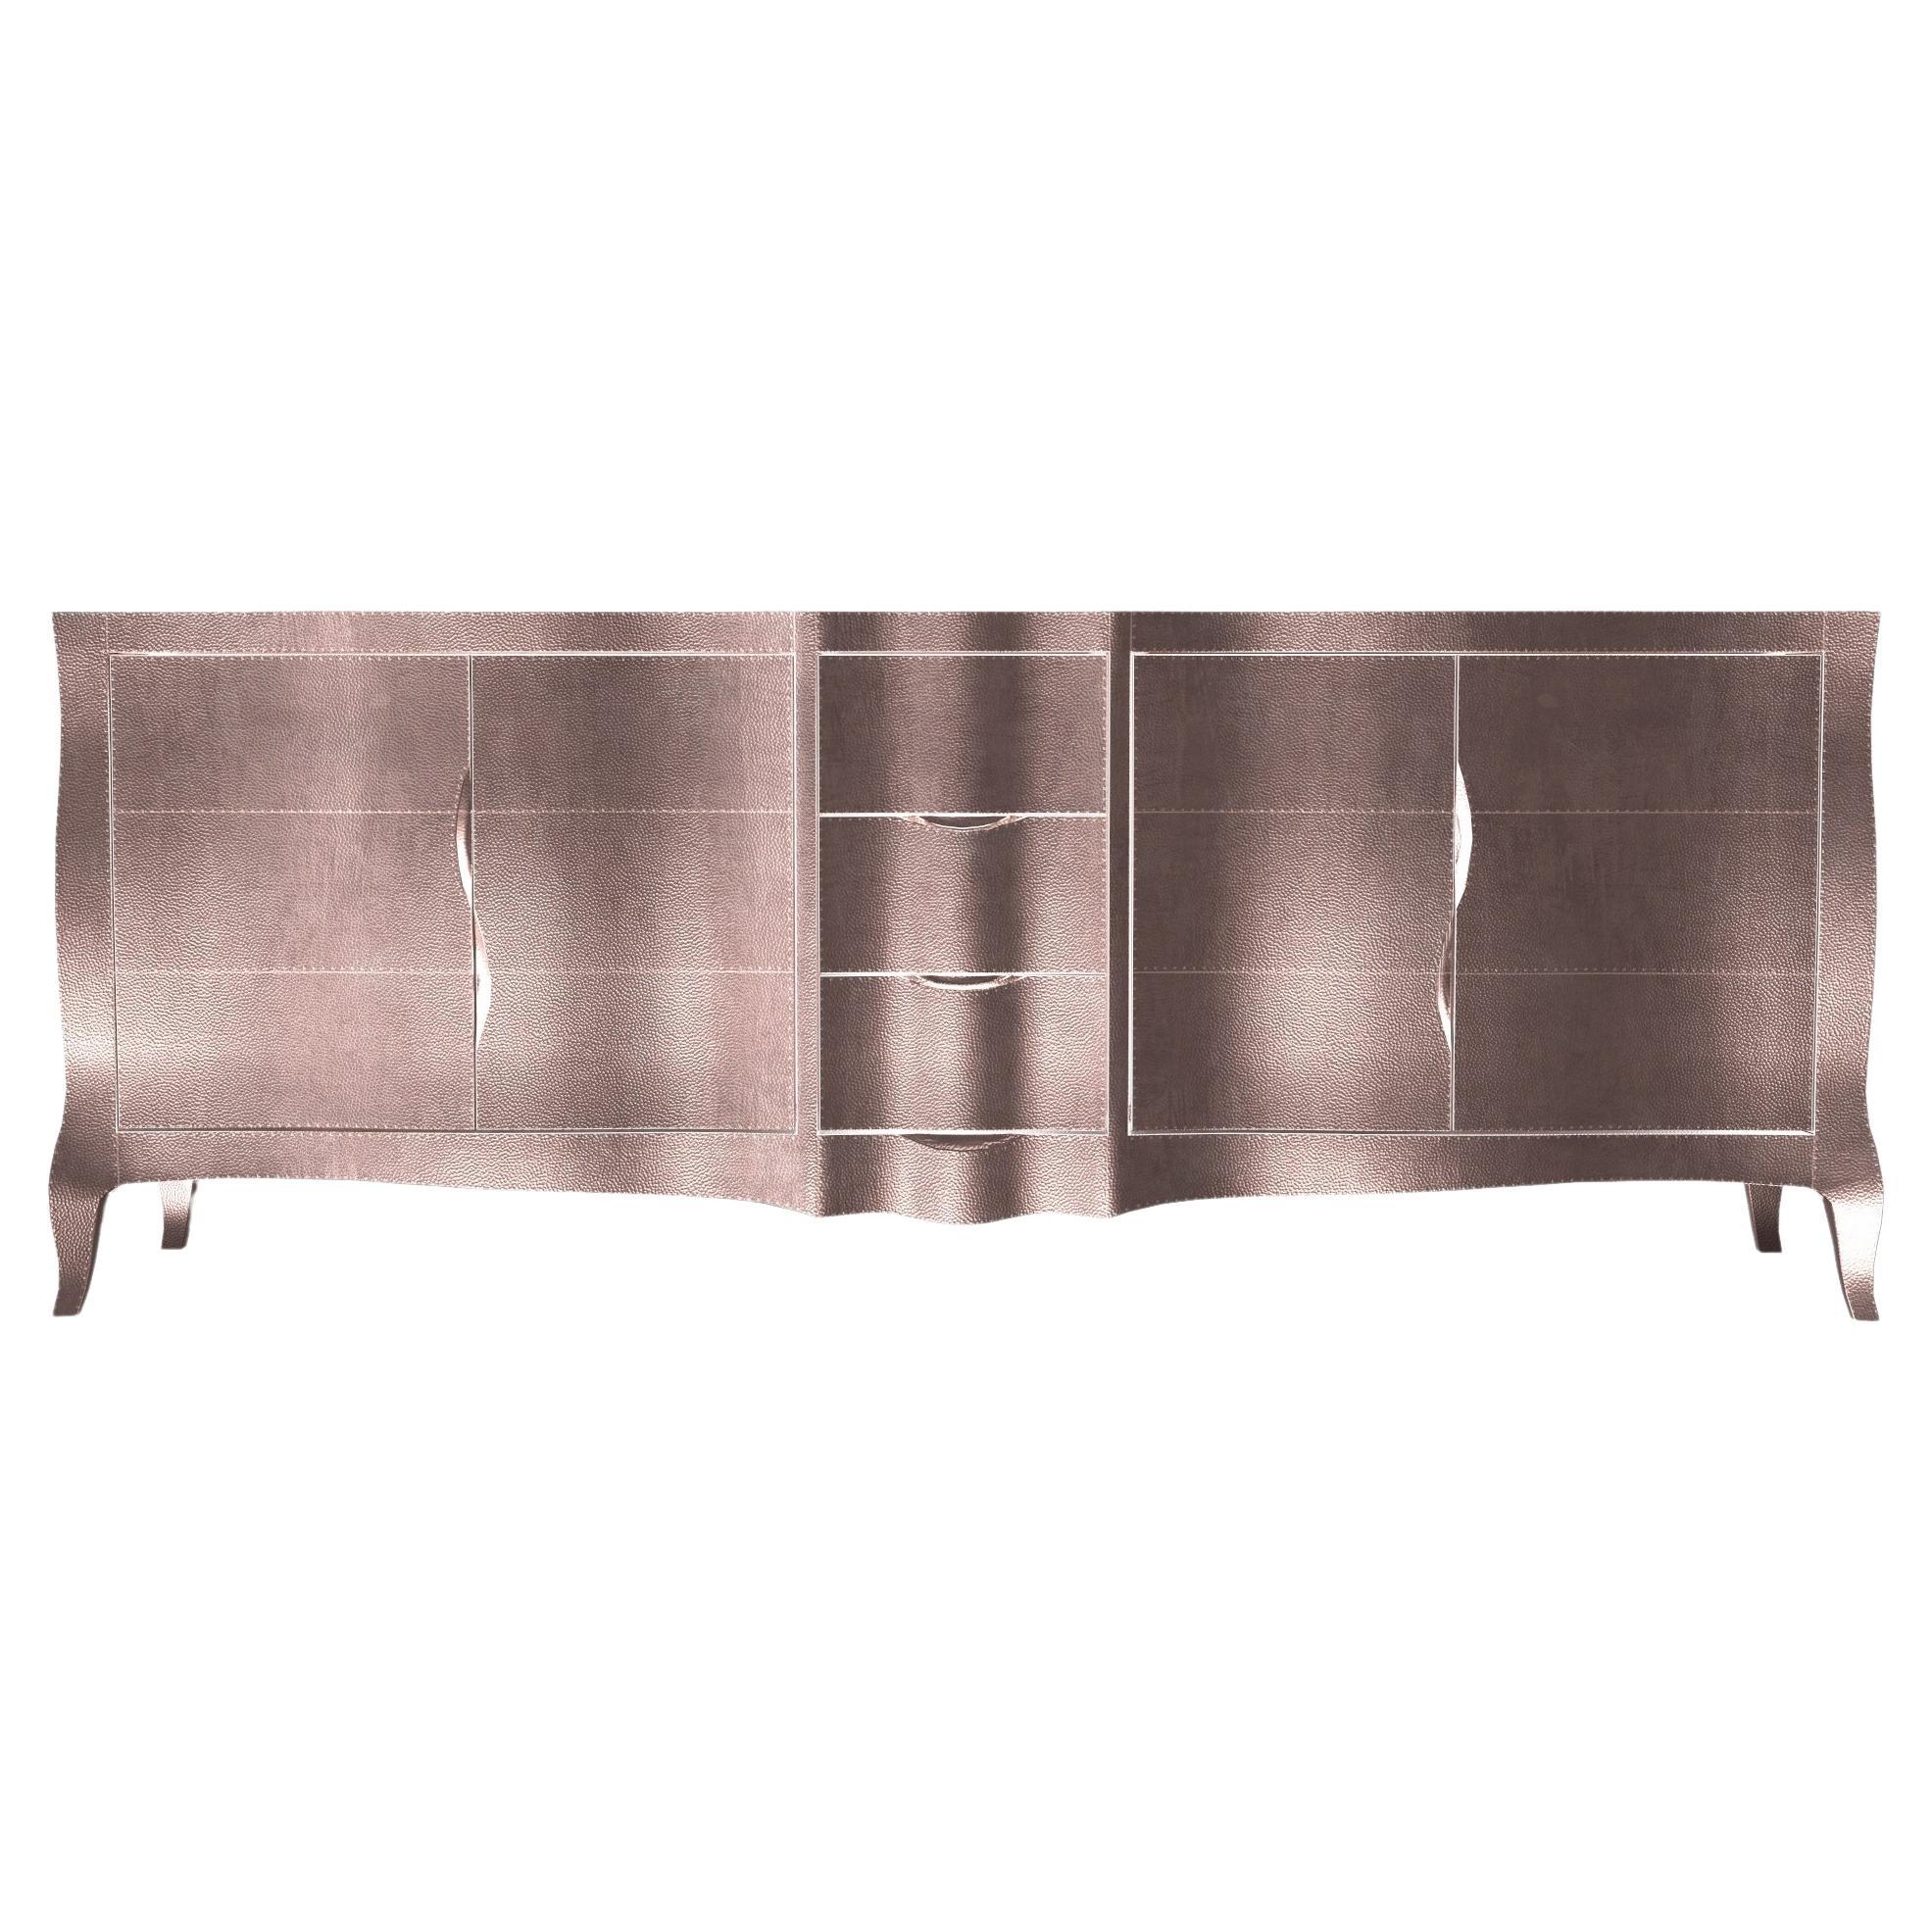 Louise Credenza Art Deco Bookcases in Mid. Hammered Copper by Paul Mathieu